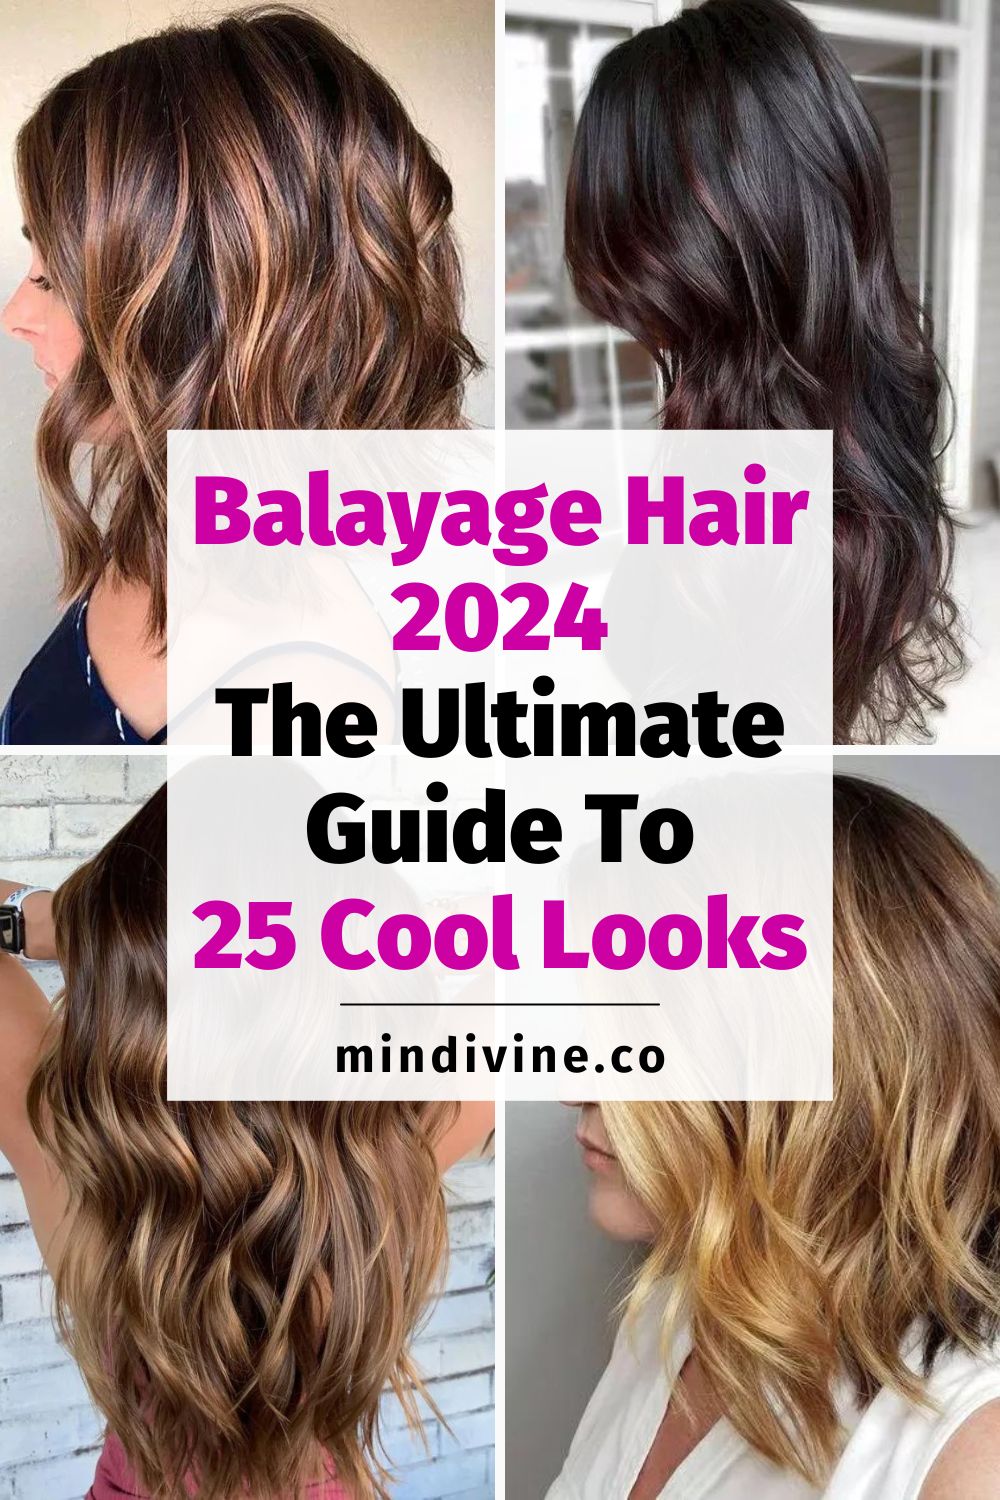 Pinterest pin with 4 images of balayage hair looks for 2024.